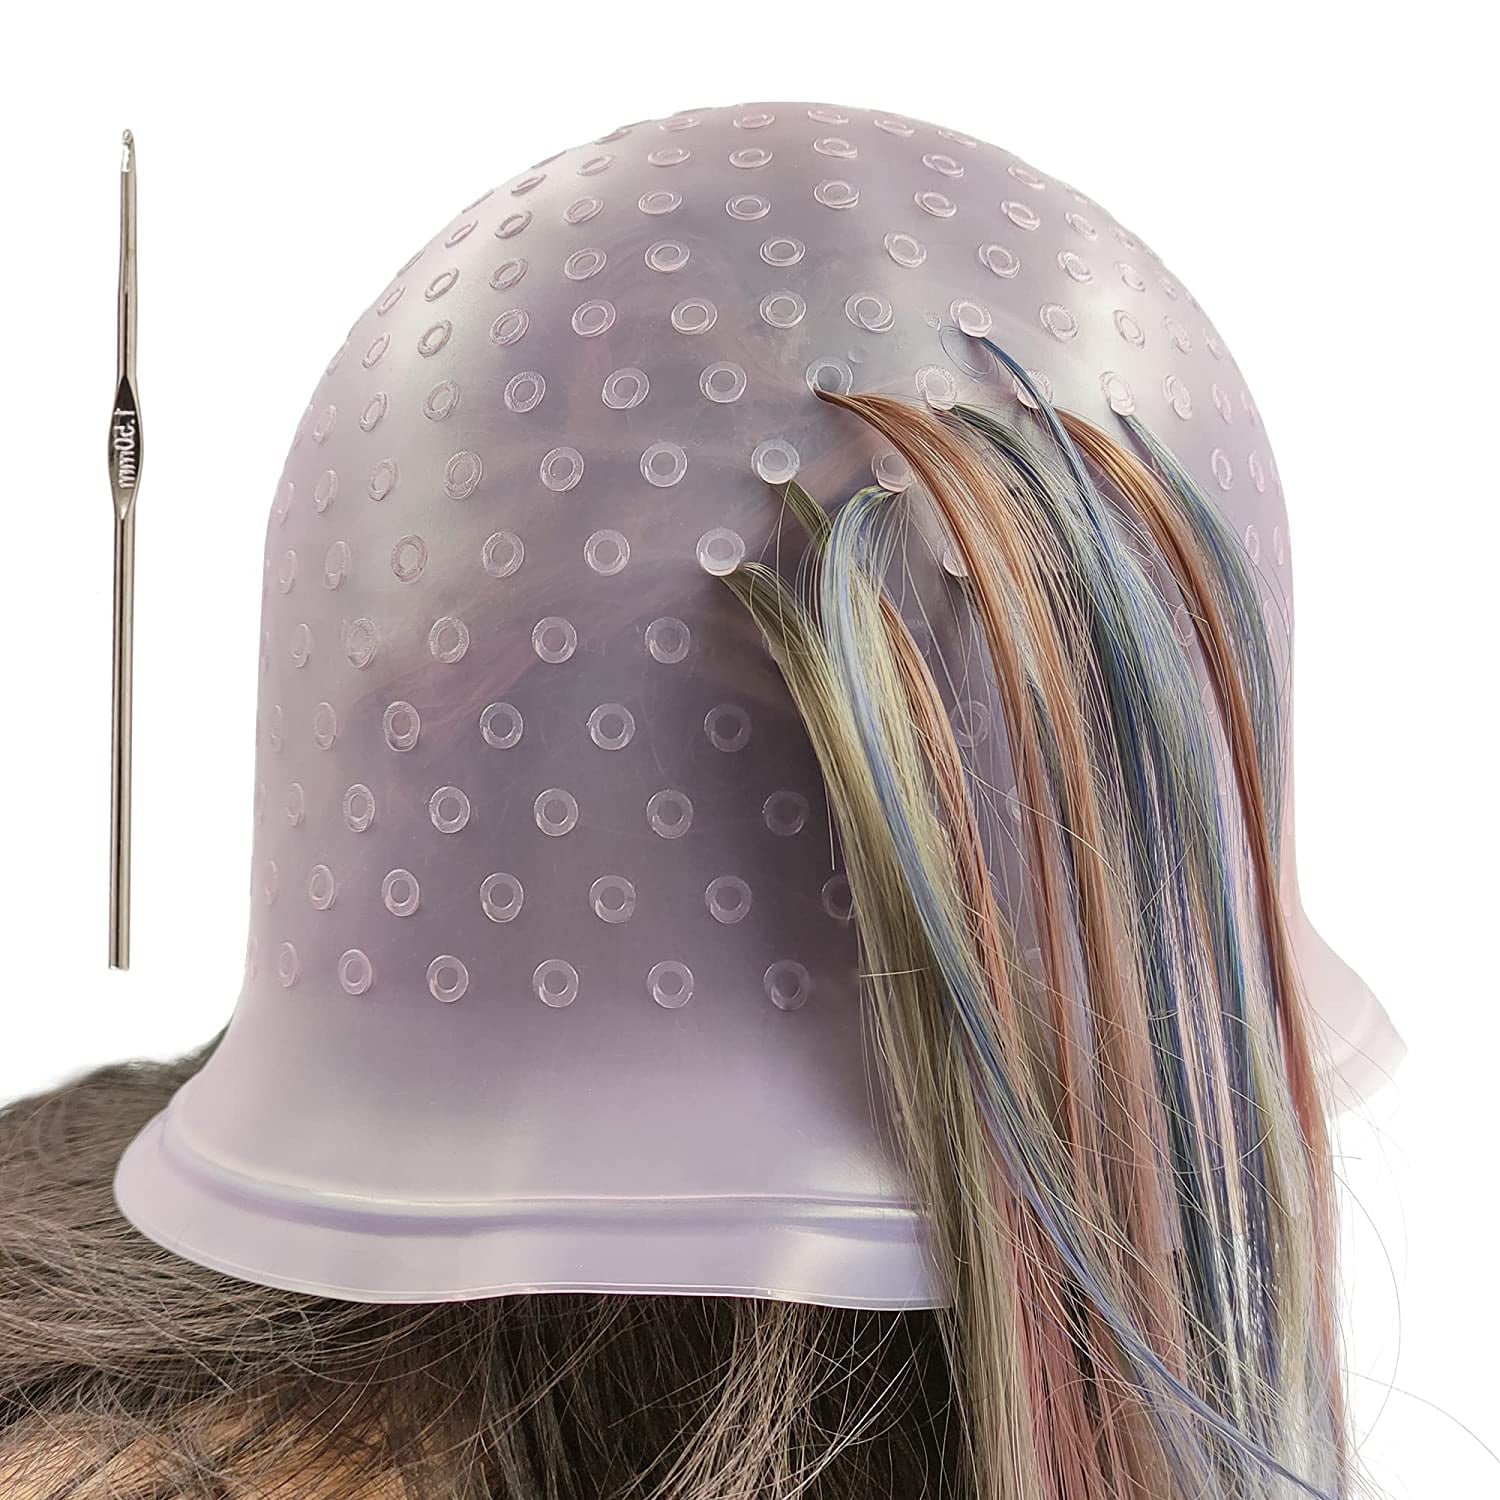 Highlighting Cap With Holes Already In Silicone Reusable Highlighting Cap  Hair Dye Cap With Holes Tipping Caps Hair Salon Hairdressing Highlight Cap  And Hook Kit (Purple) 